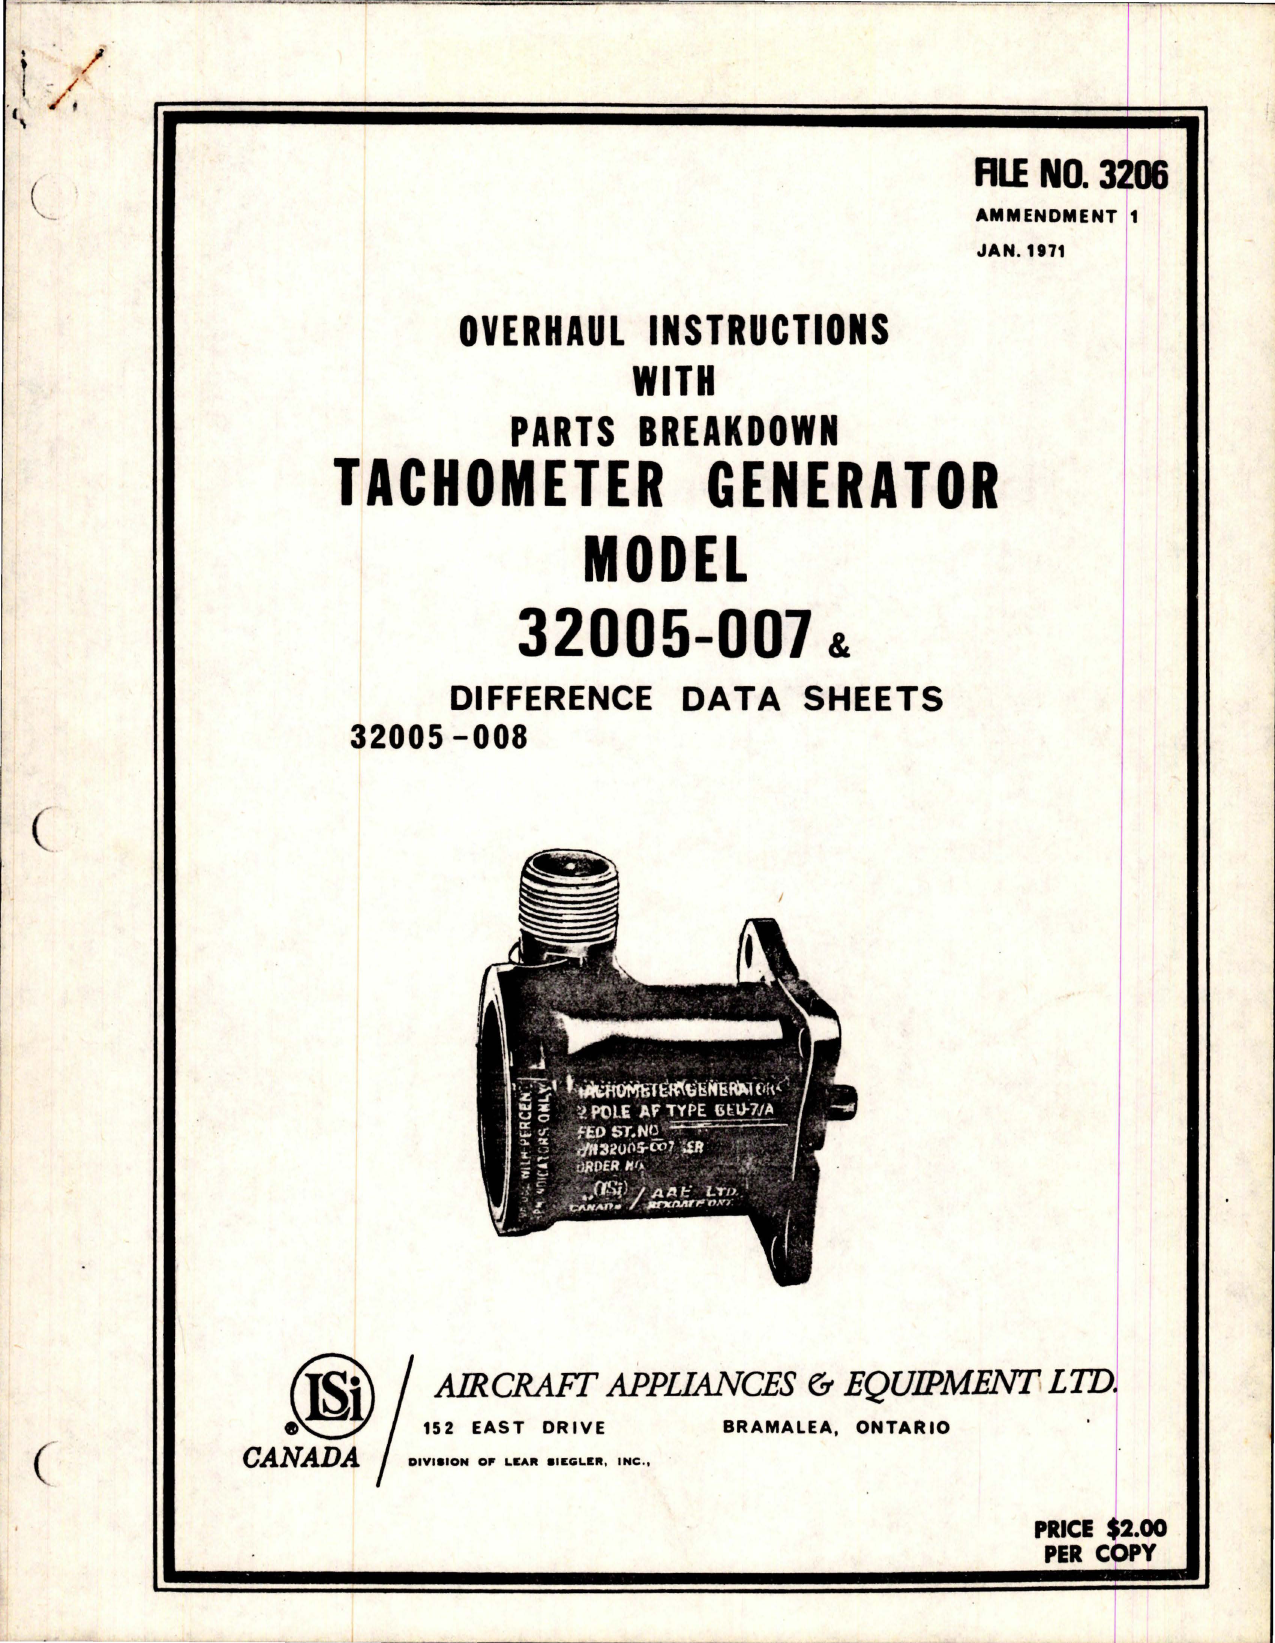 Sample page 1 from AirCorps Library document: Overhaul Instructions with Parts -  for Tachometer Generator - Amendment 1 - Models 32005-007 and 32005-008 